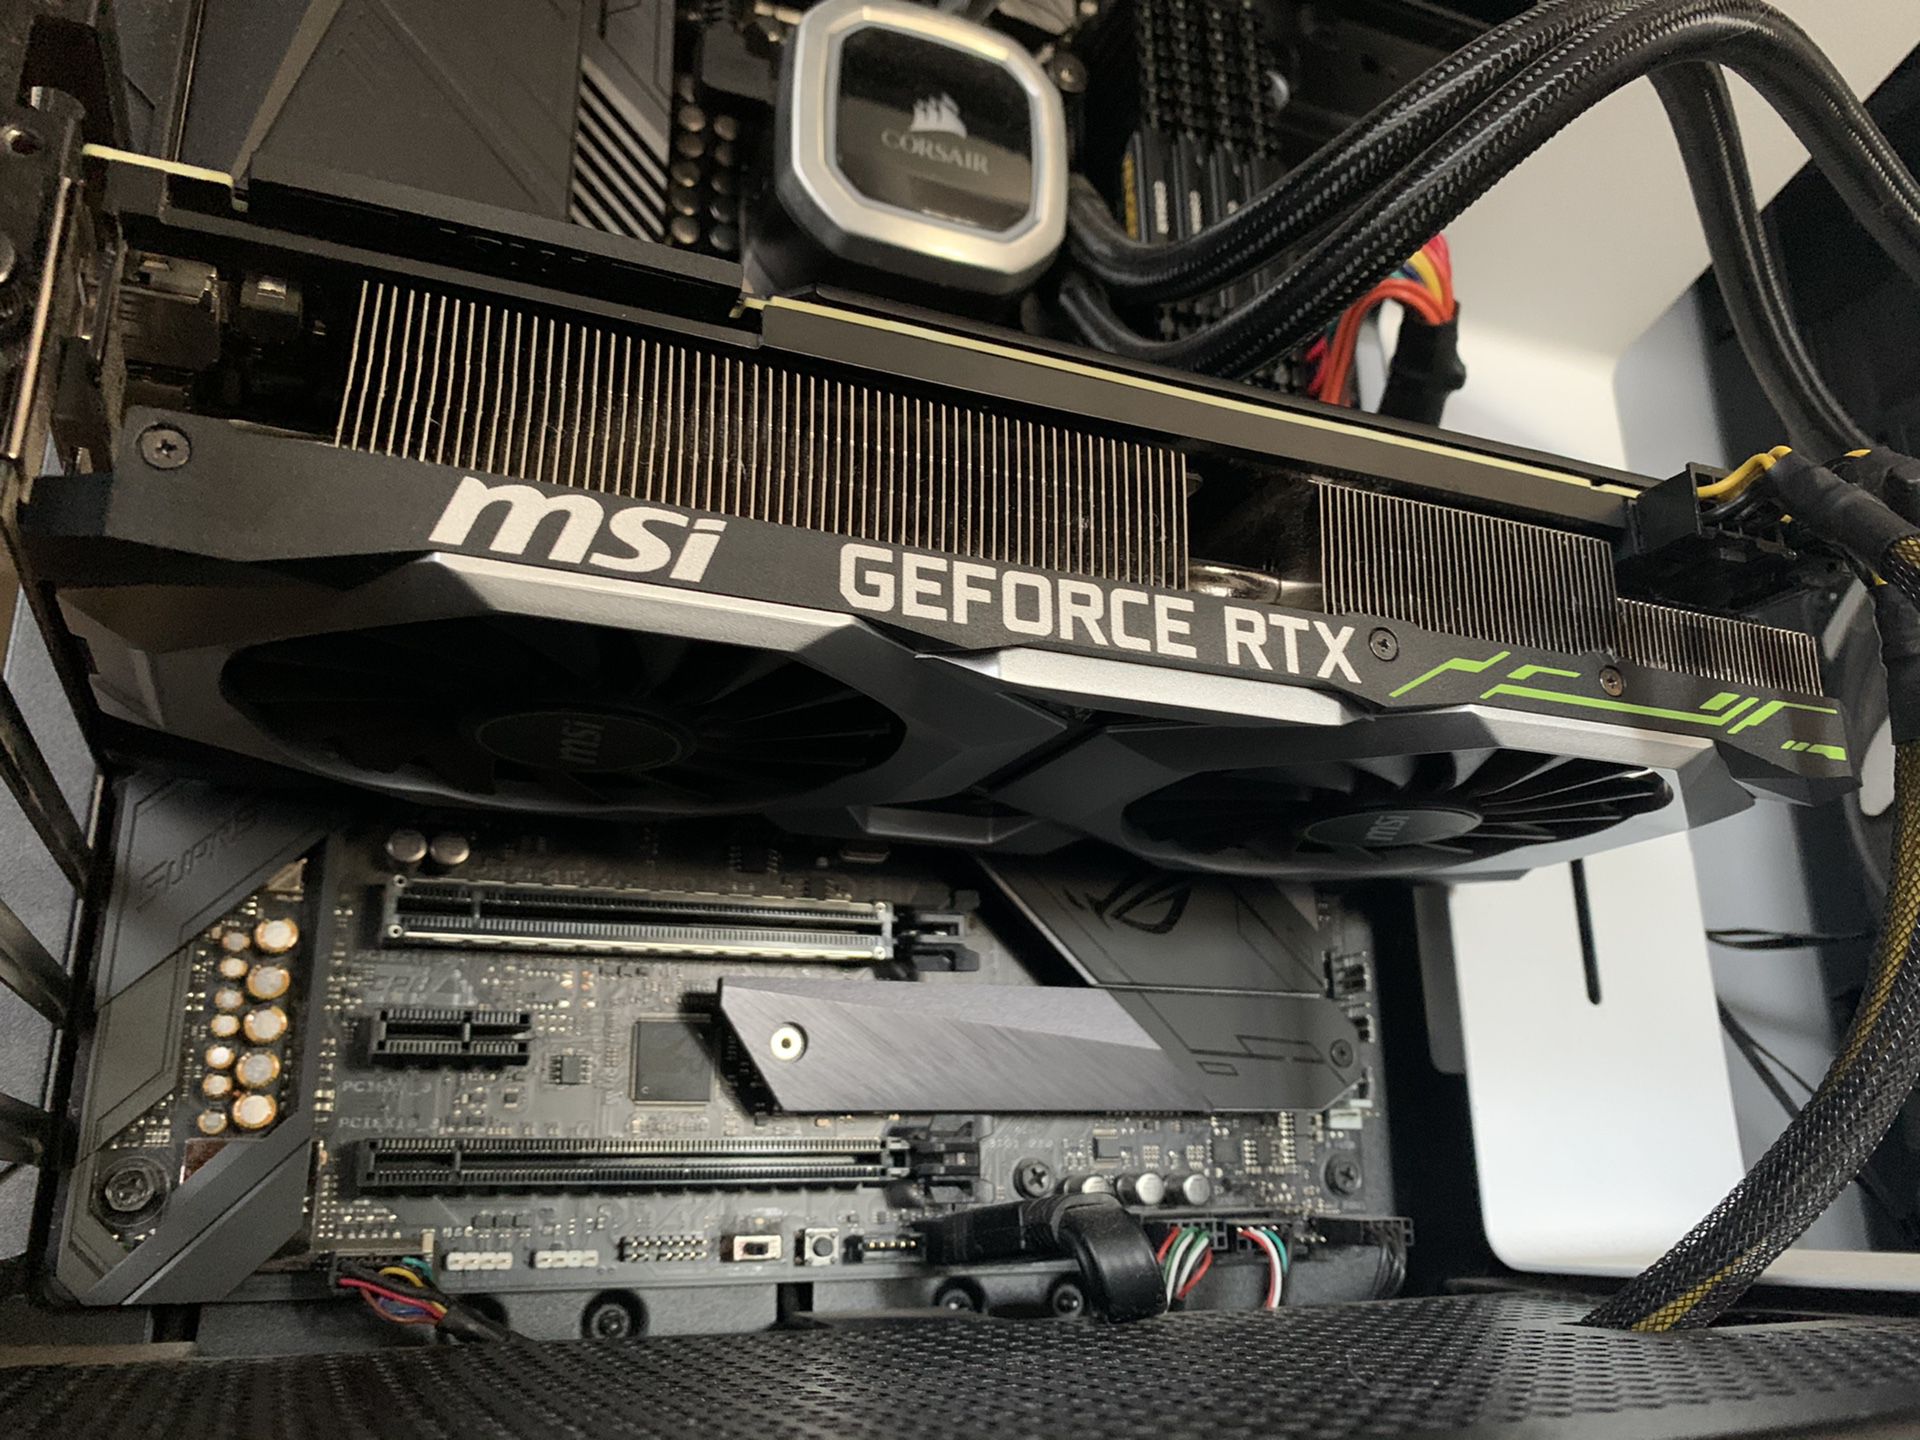 RTX 2080 Ti VENTUS 11G OC for Sale in Thousand Oaks, CA - OfferUp